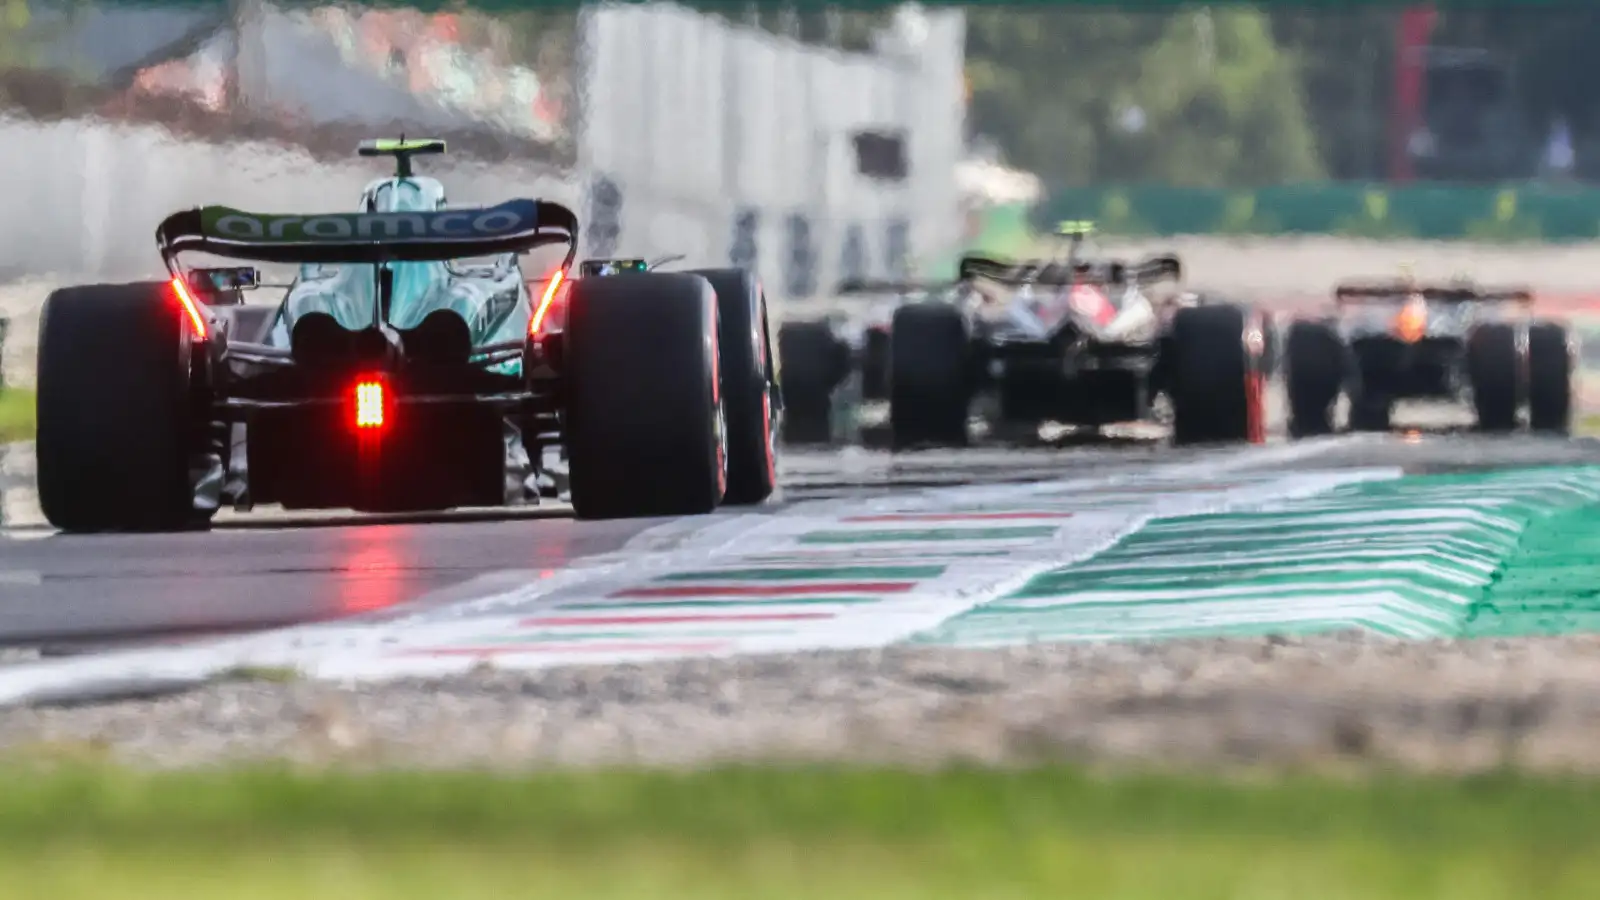 An Aston Martin F1 car during practice for the Italian Grand Prix at Monza.